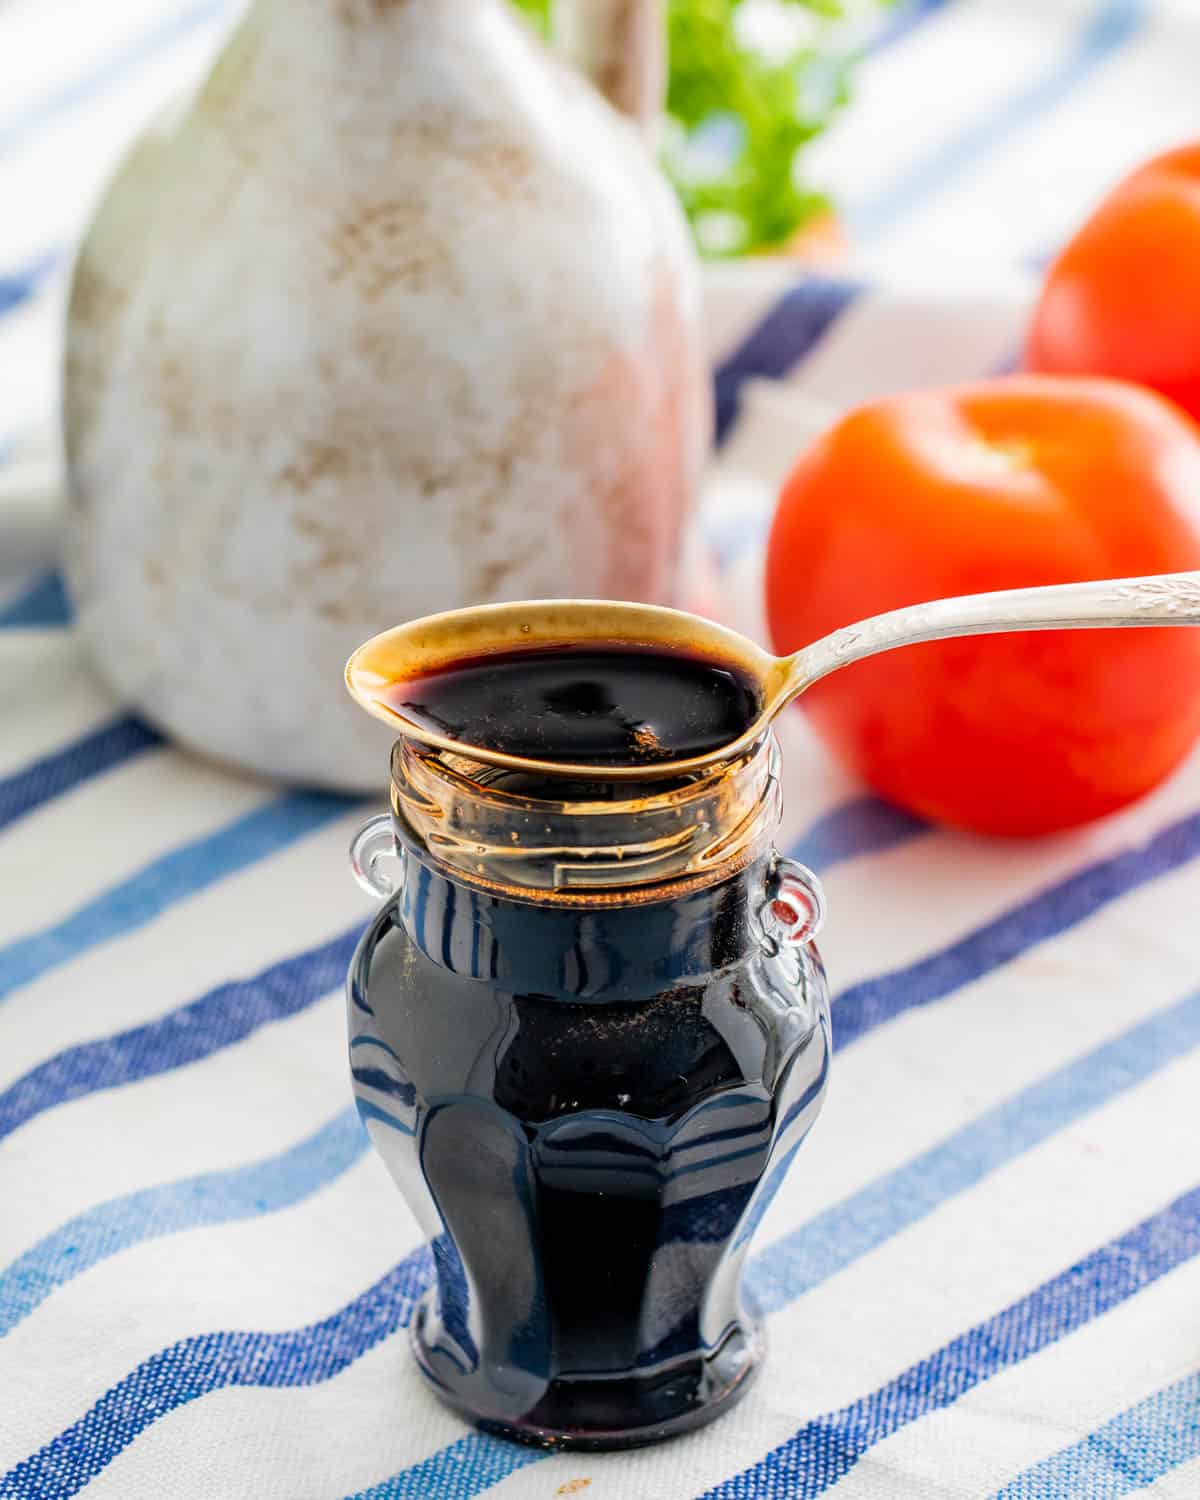 Balsamic Glaze - Craving Home Cooked